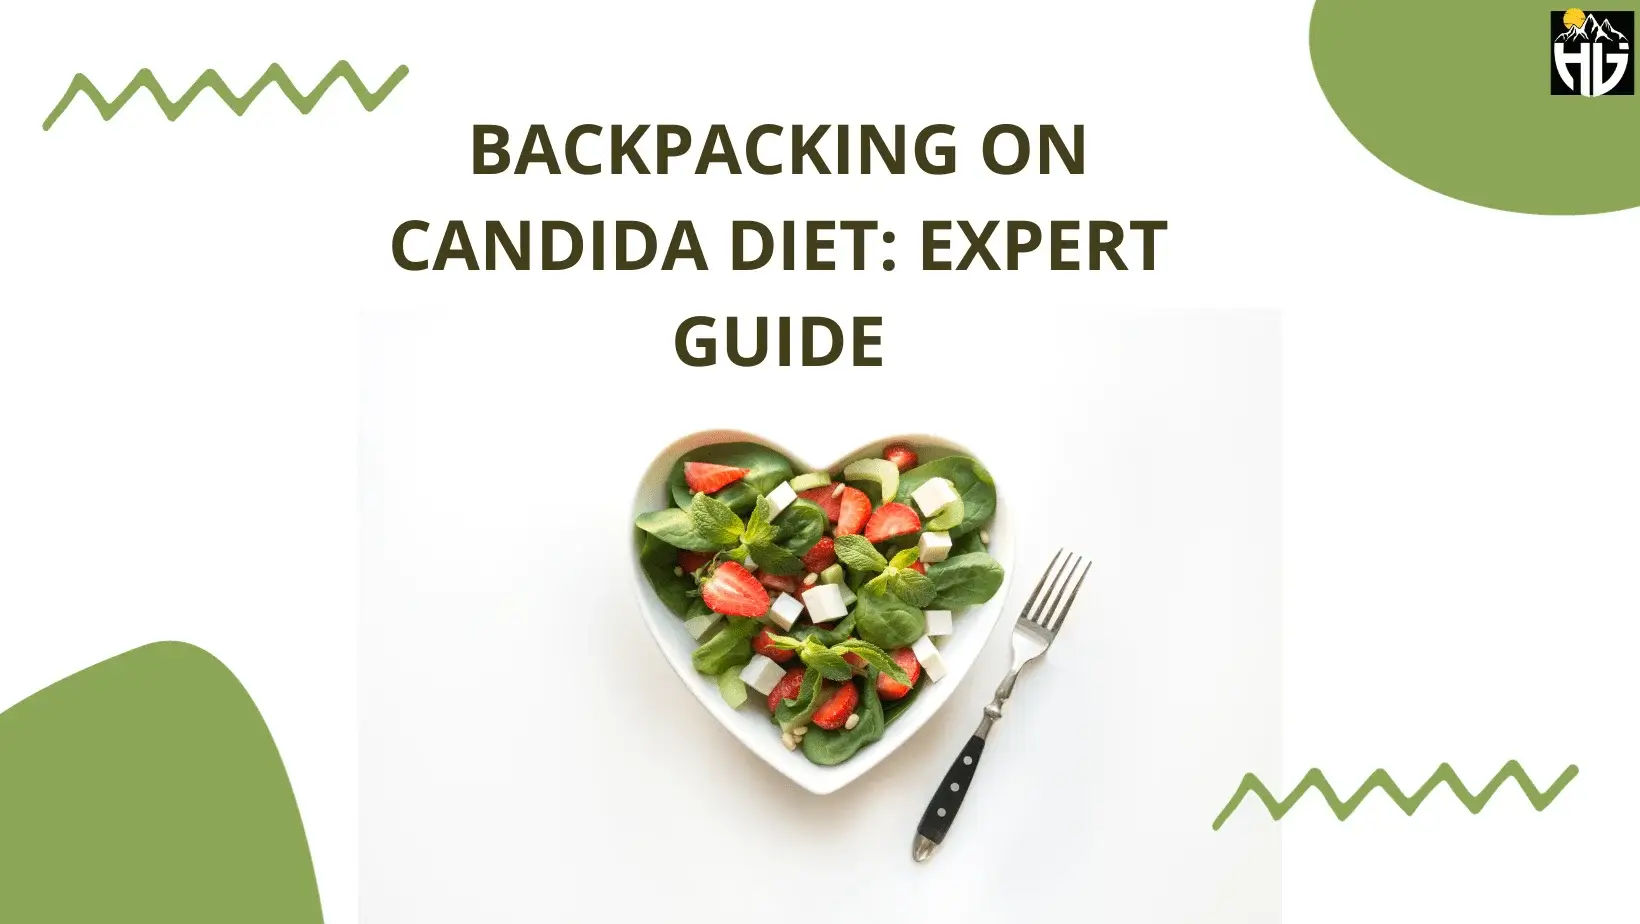 Backpacking on Candida Diet: Expert Guide